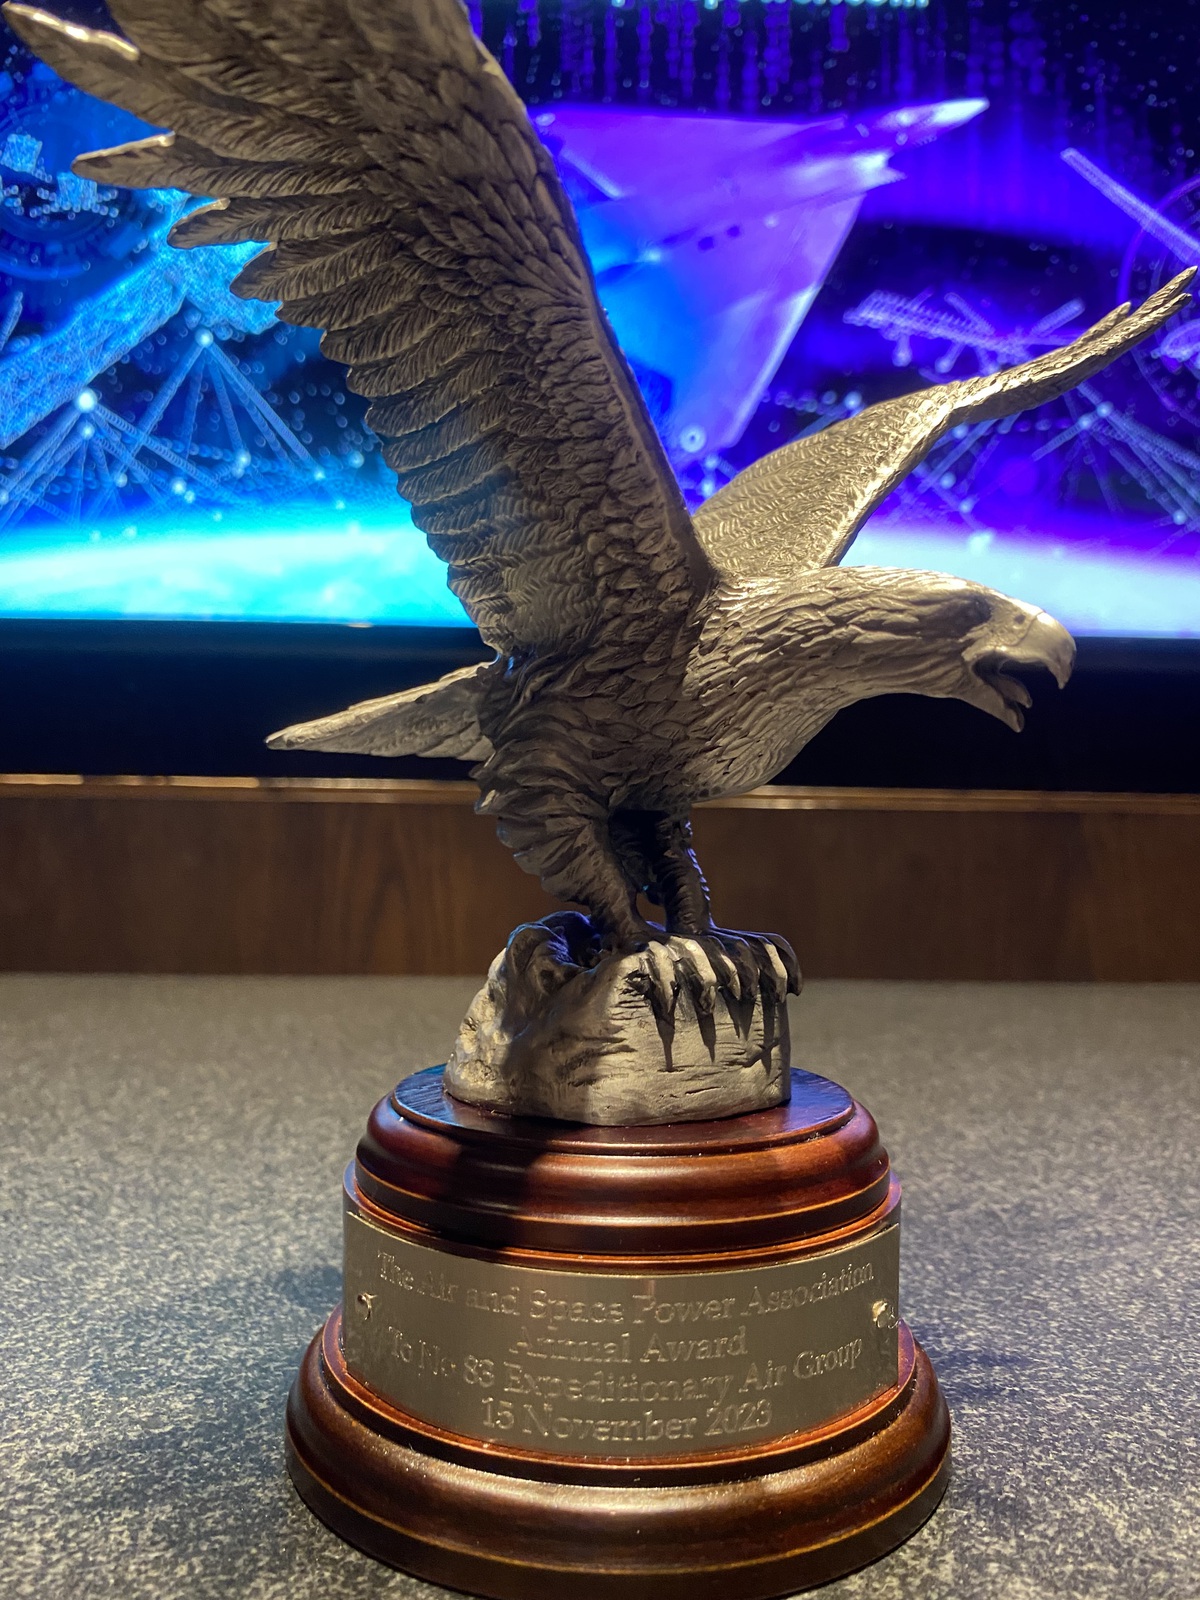 The trophy for the award, depicting an eagle about to take flight